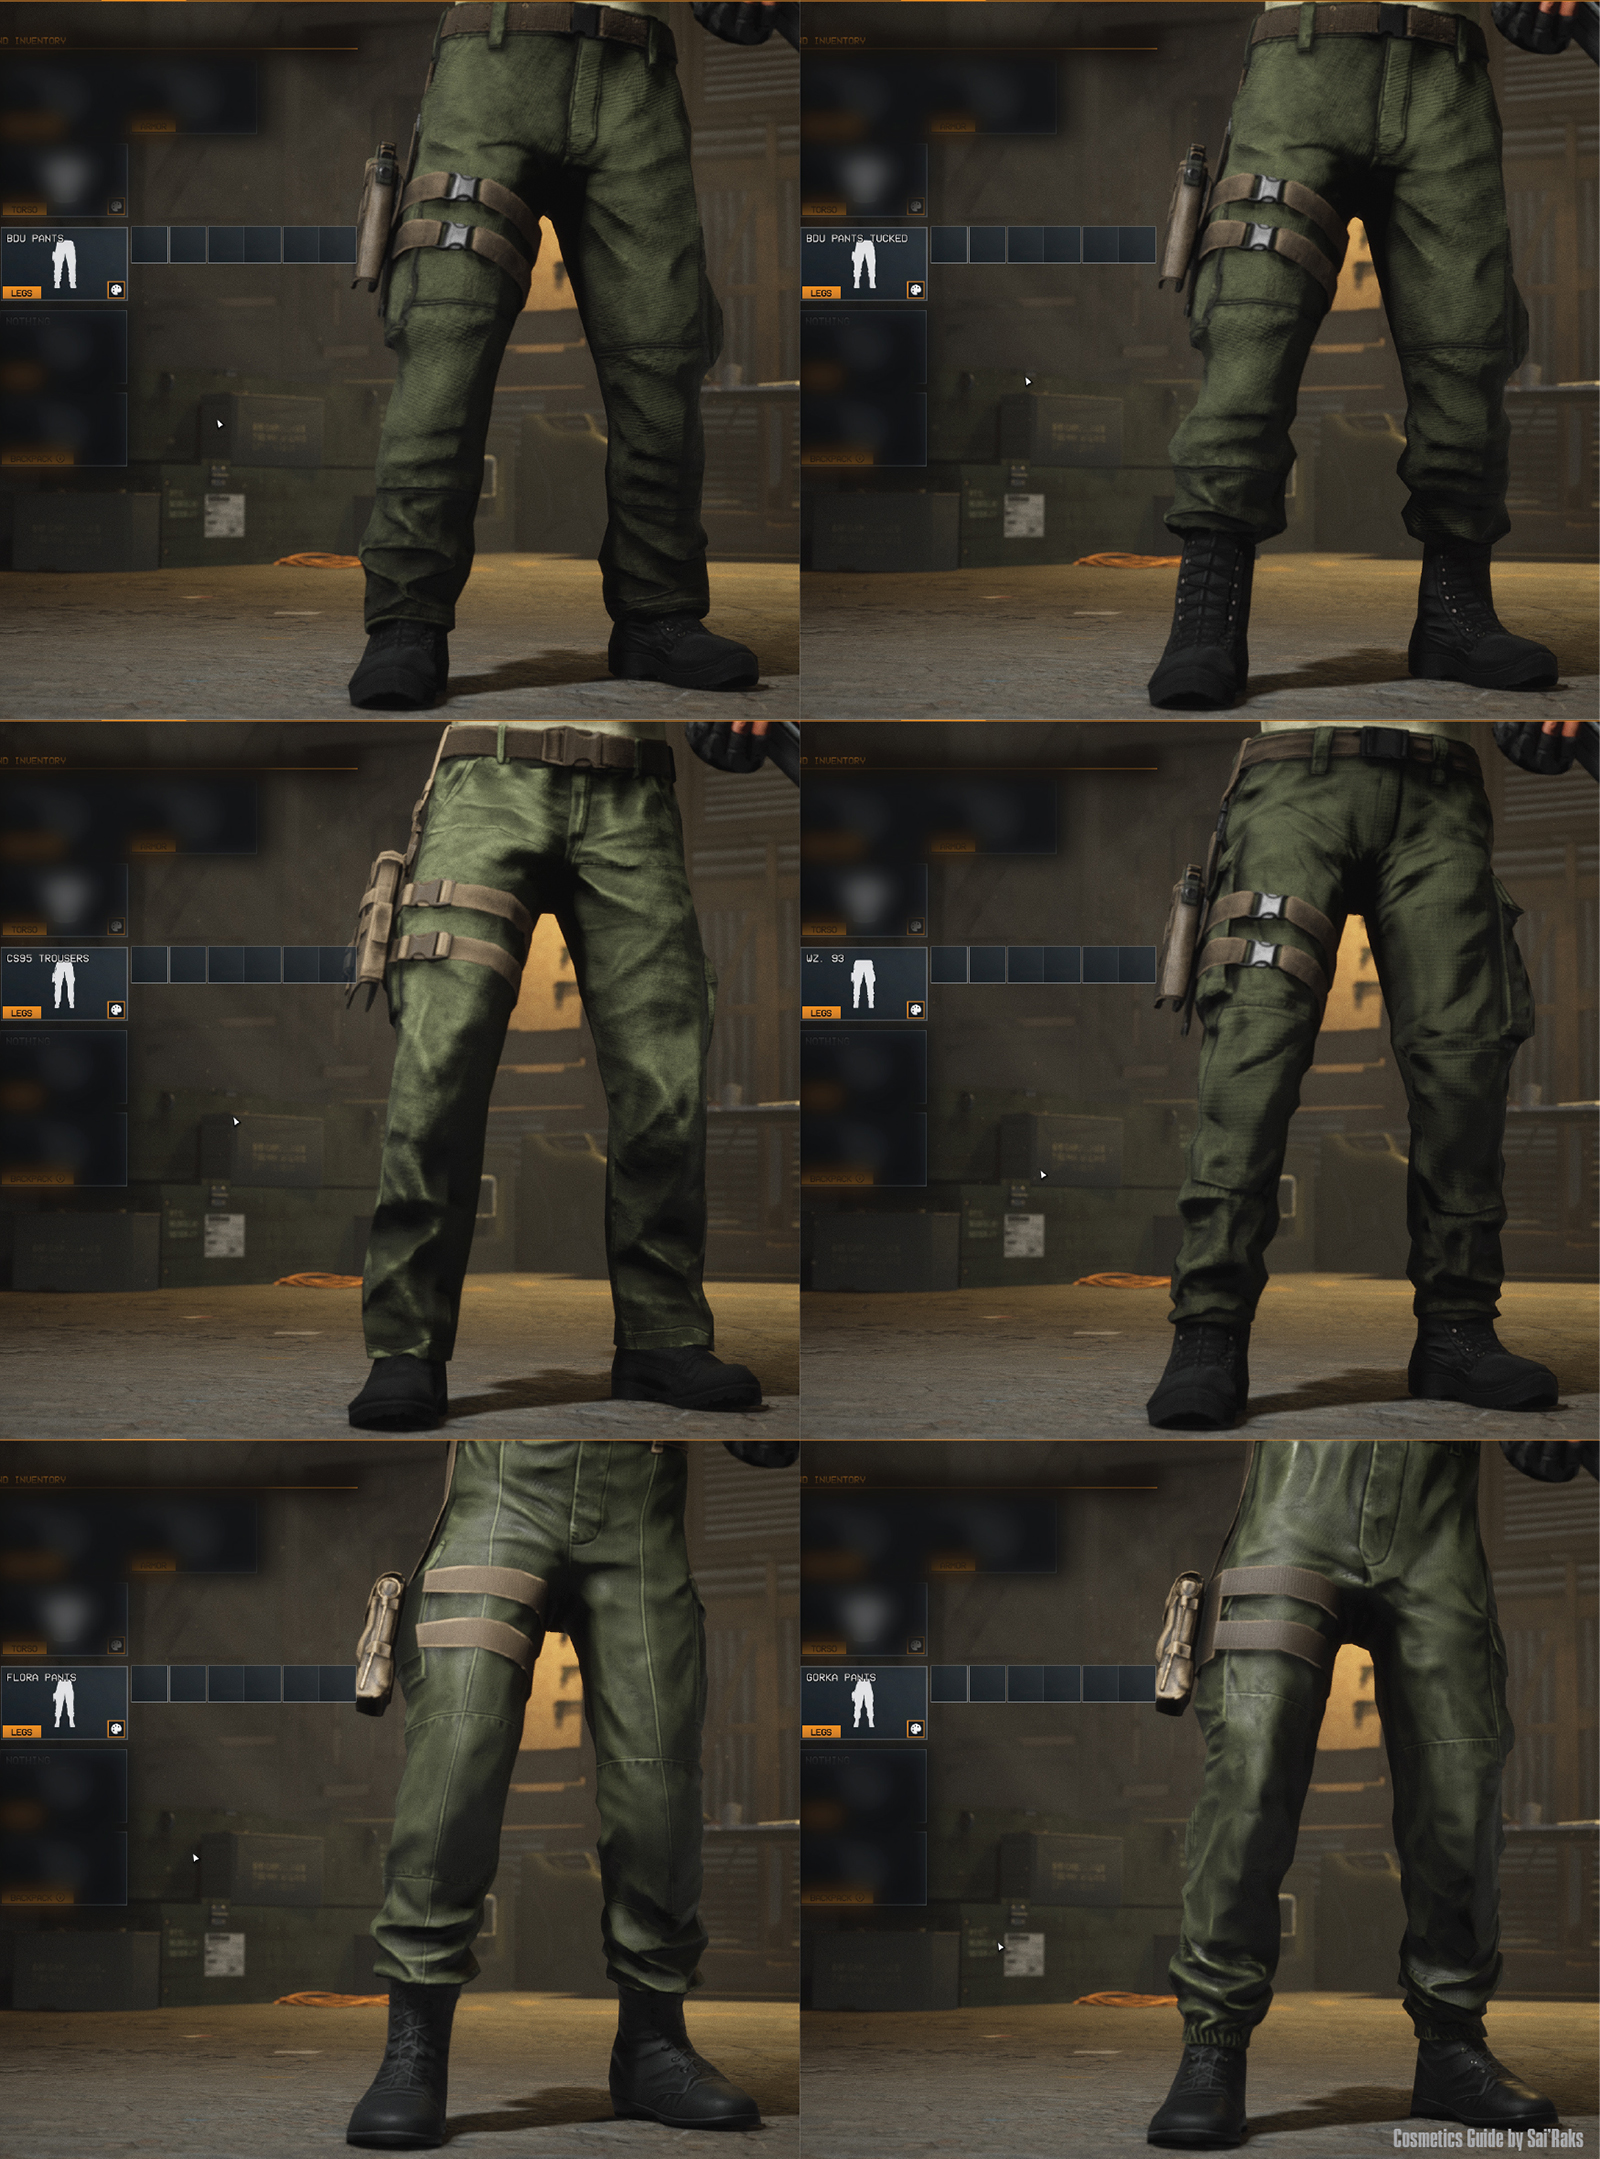 Thunder Tier One Customization and Unlocks guide (with Pictures) - Pants - B14B3B0